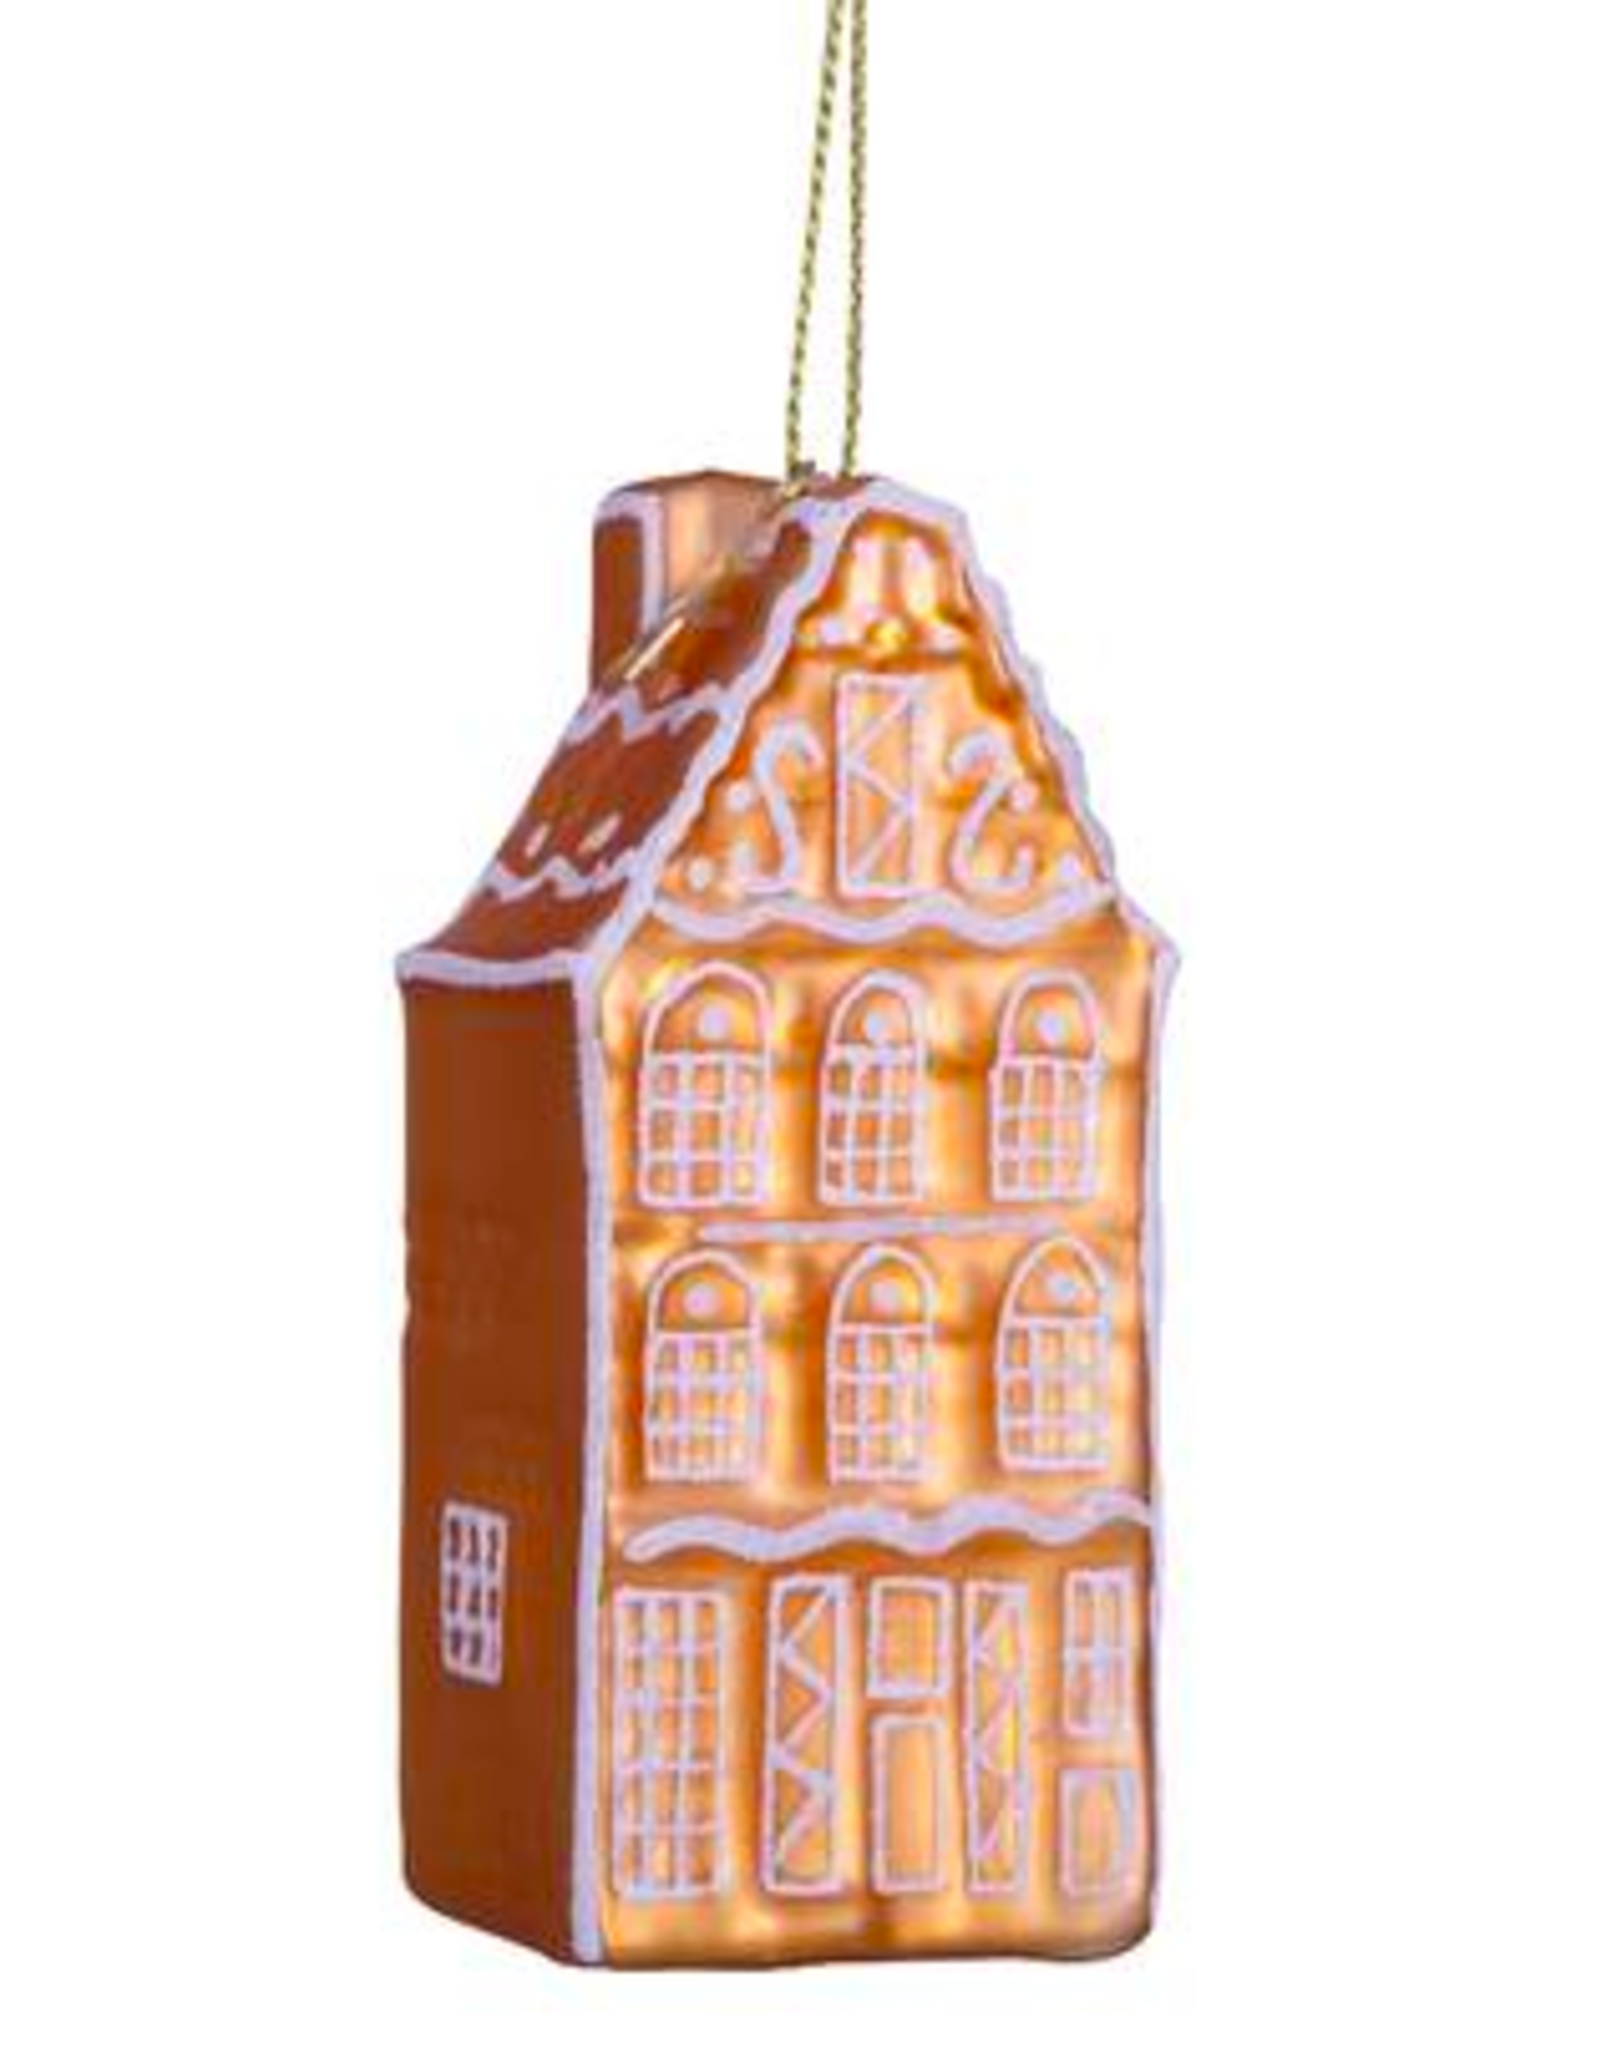 Vondels Ornament glass ginger bread canal house